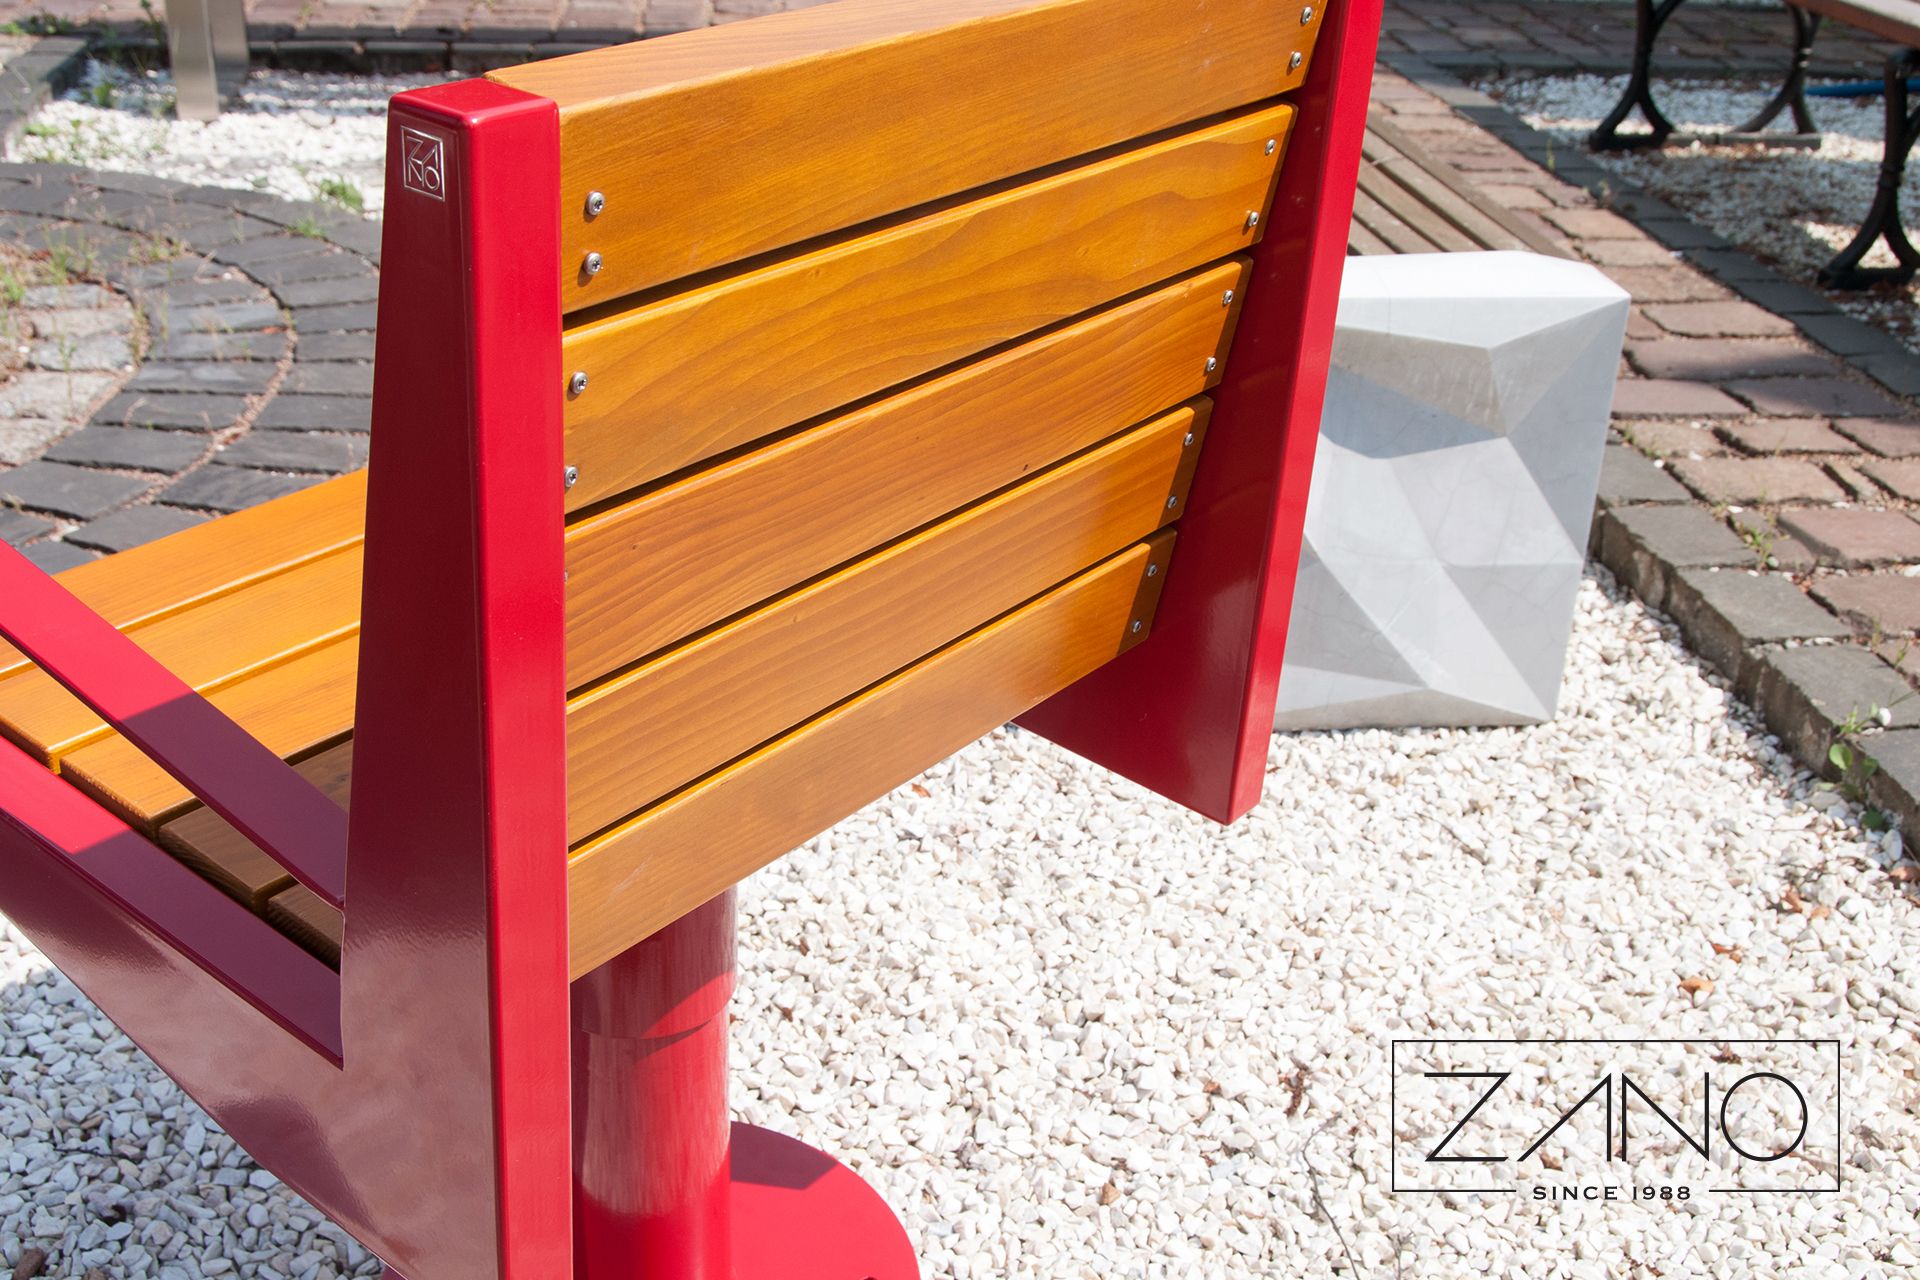 Park seat made of steel and wood